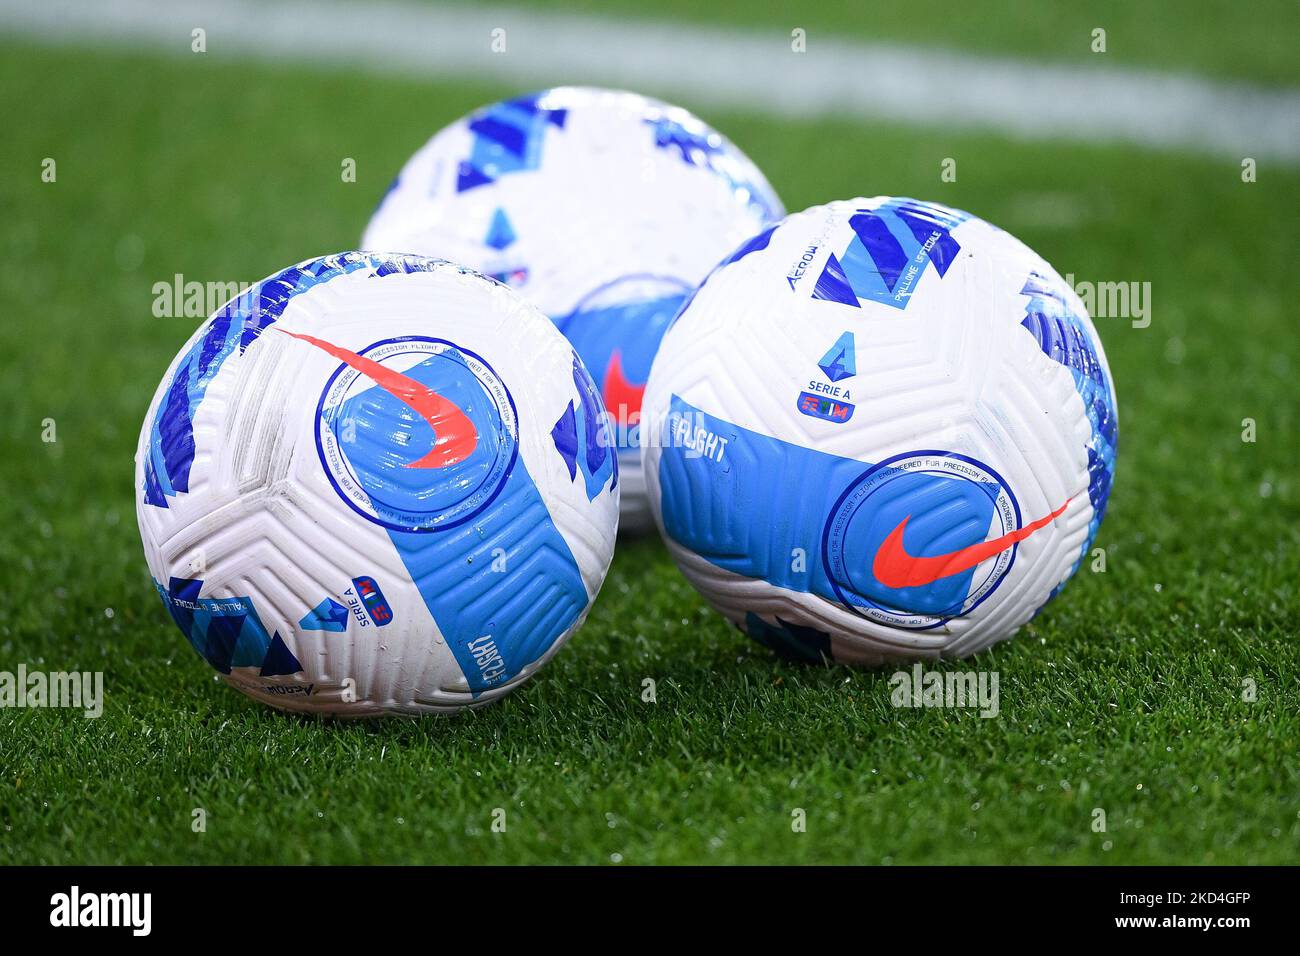 New Nike Flight match ball of Serie A during the Serie A match between SSC Napoli and AC Milan at Stadio Diego Armando Maradona, Naples, Italy on 6 March 2022. (Photo by Giuseppe Maffia/NurPhoto) Stock Photo